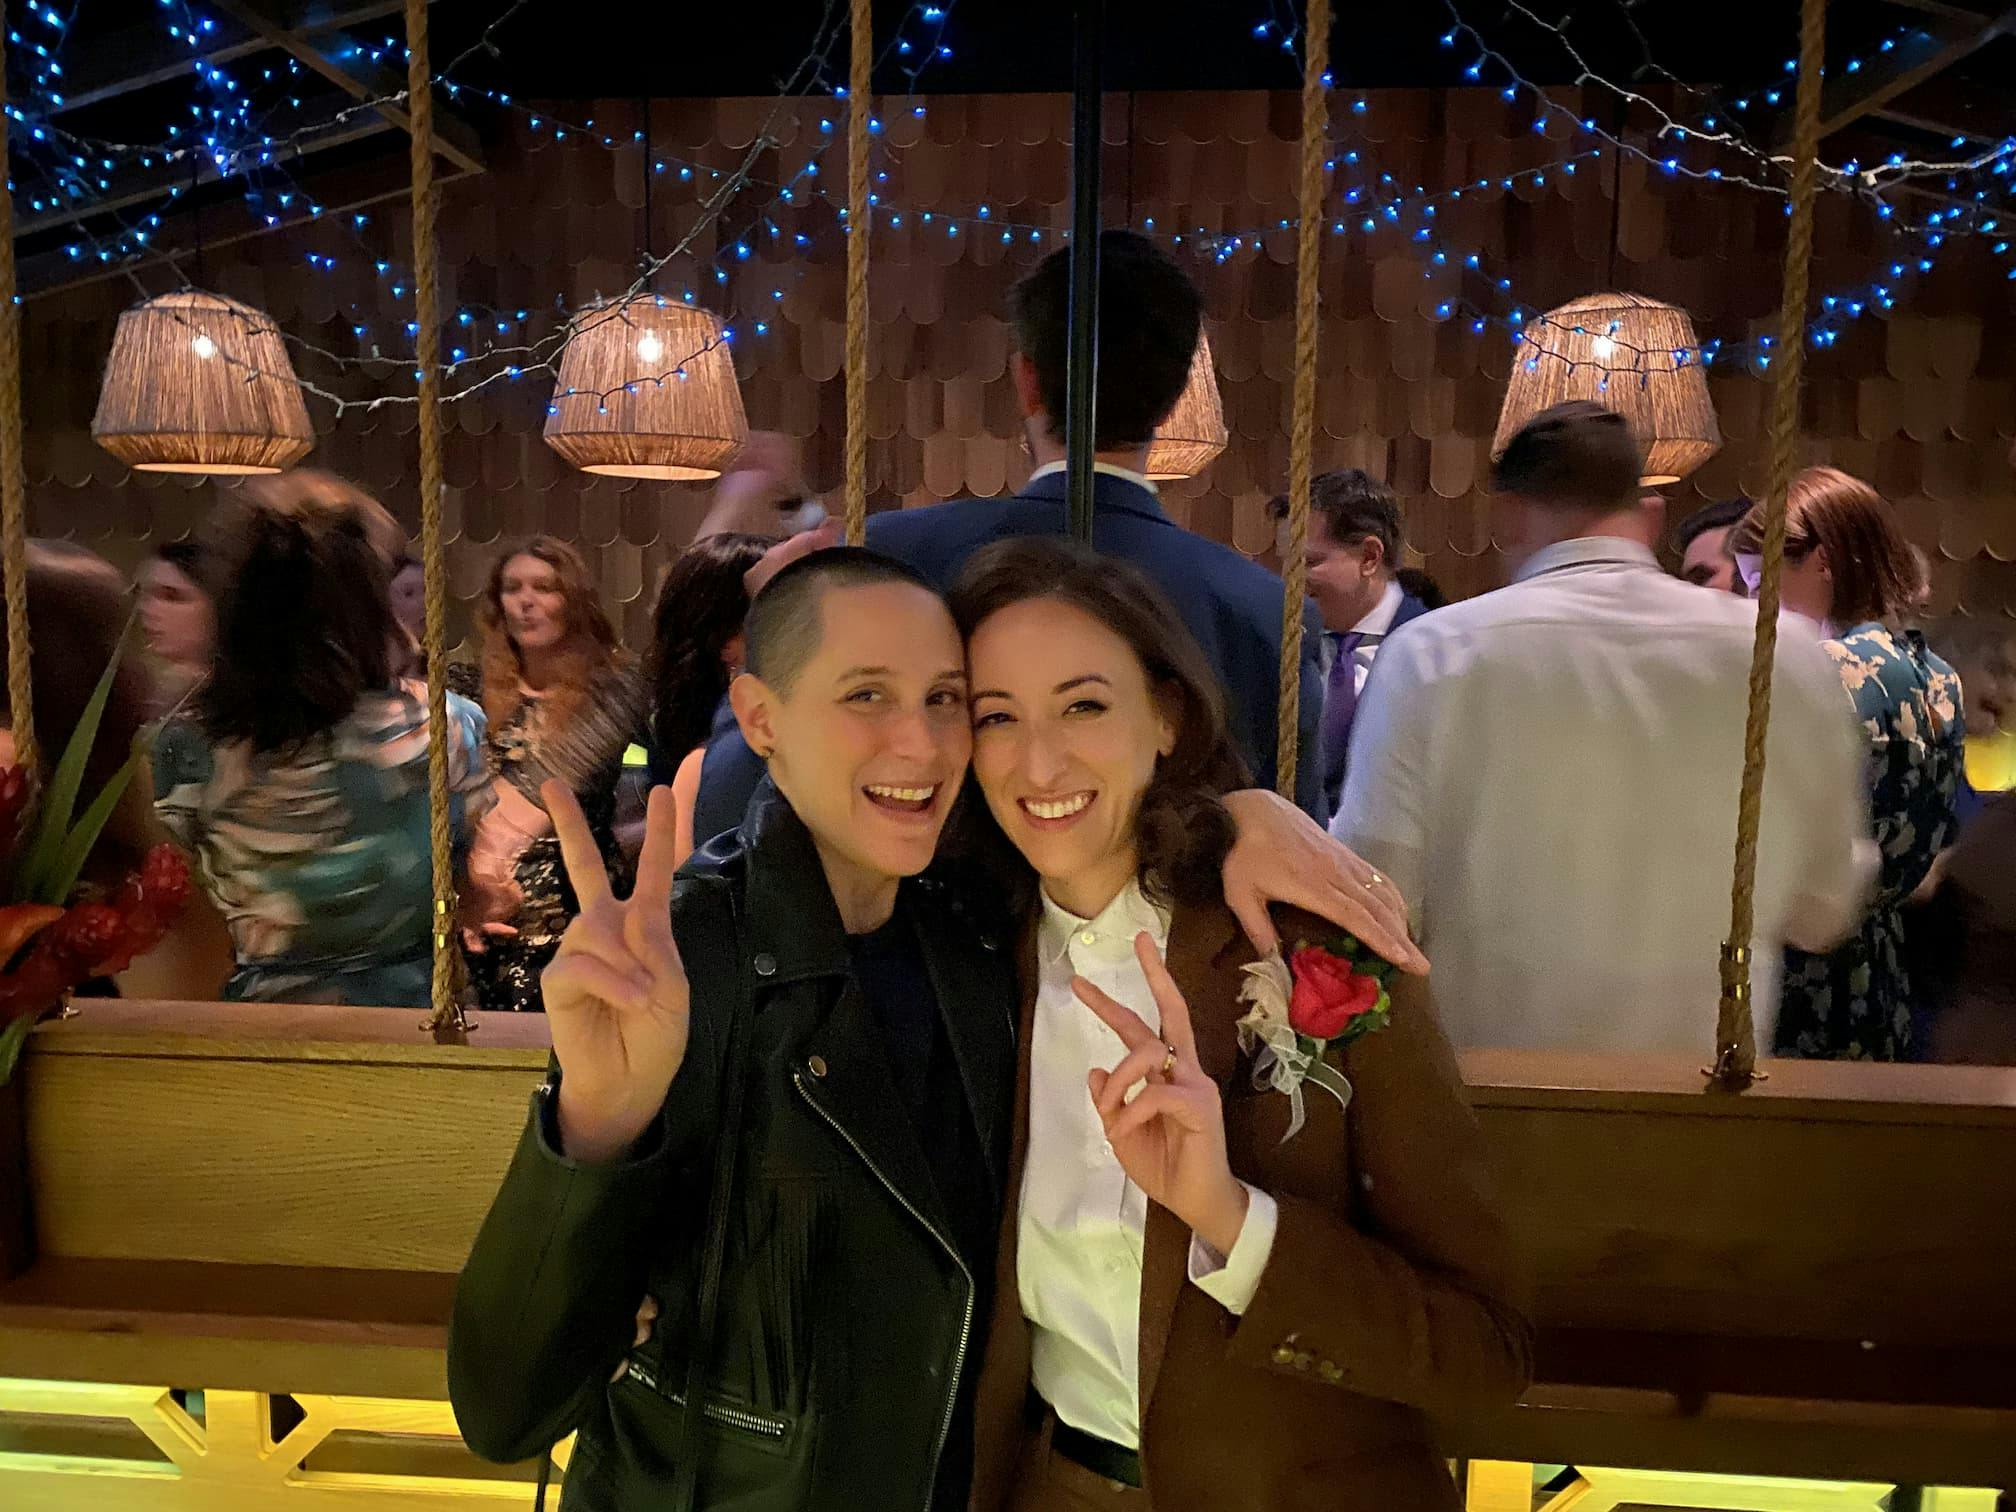 Carla and Alessia as guests at Véro and Geoff's wedding, smiling beside the dance floor and flashing the peace sign